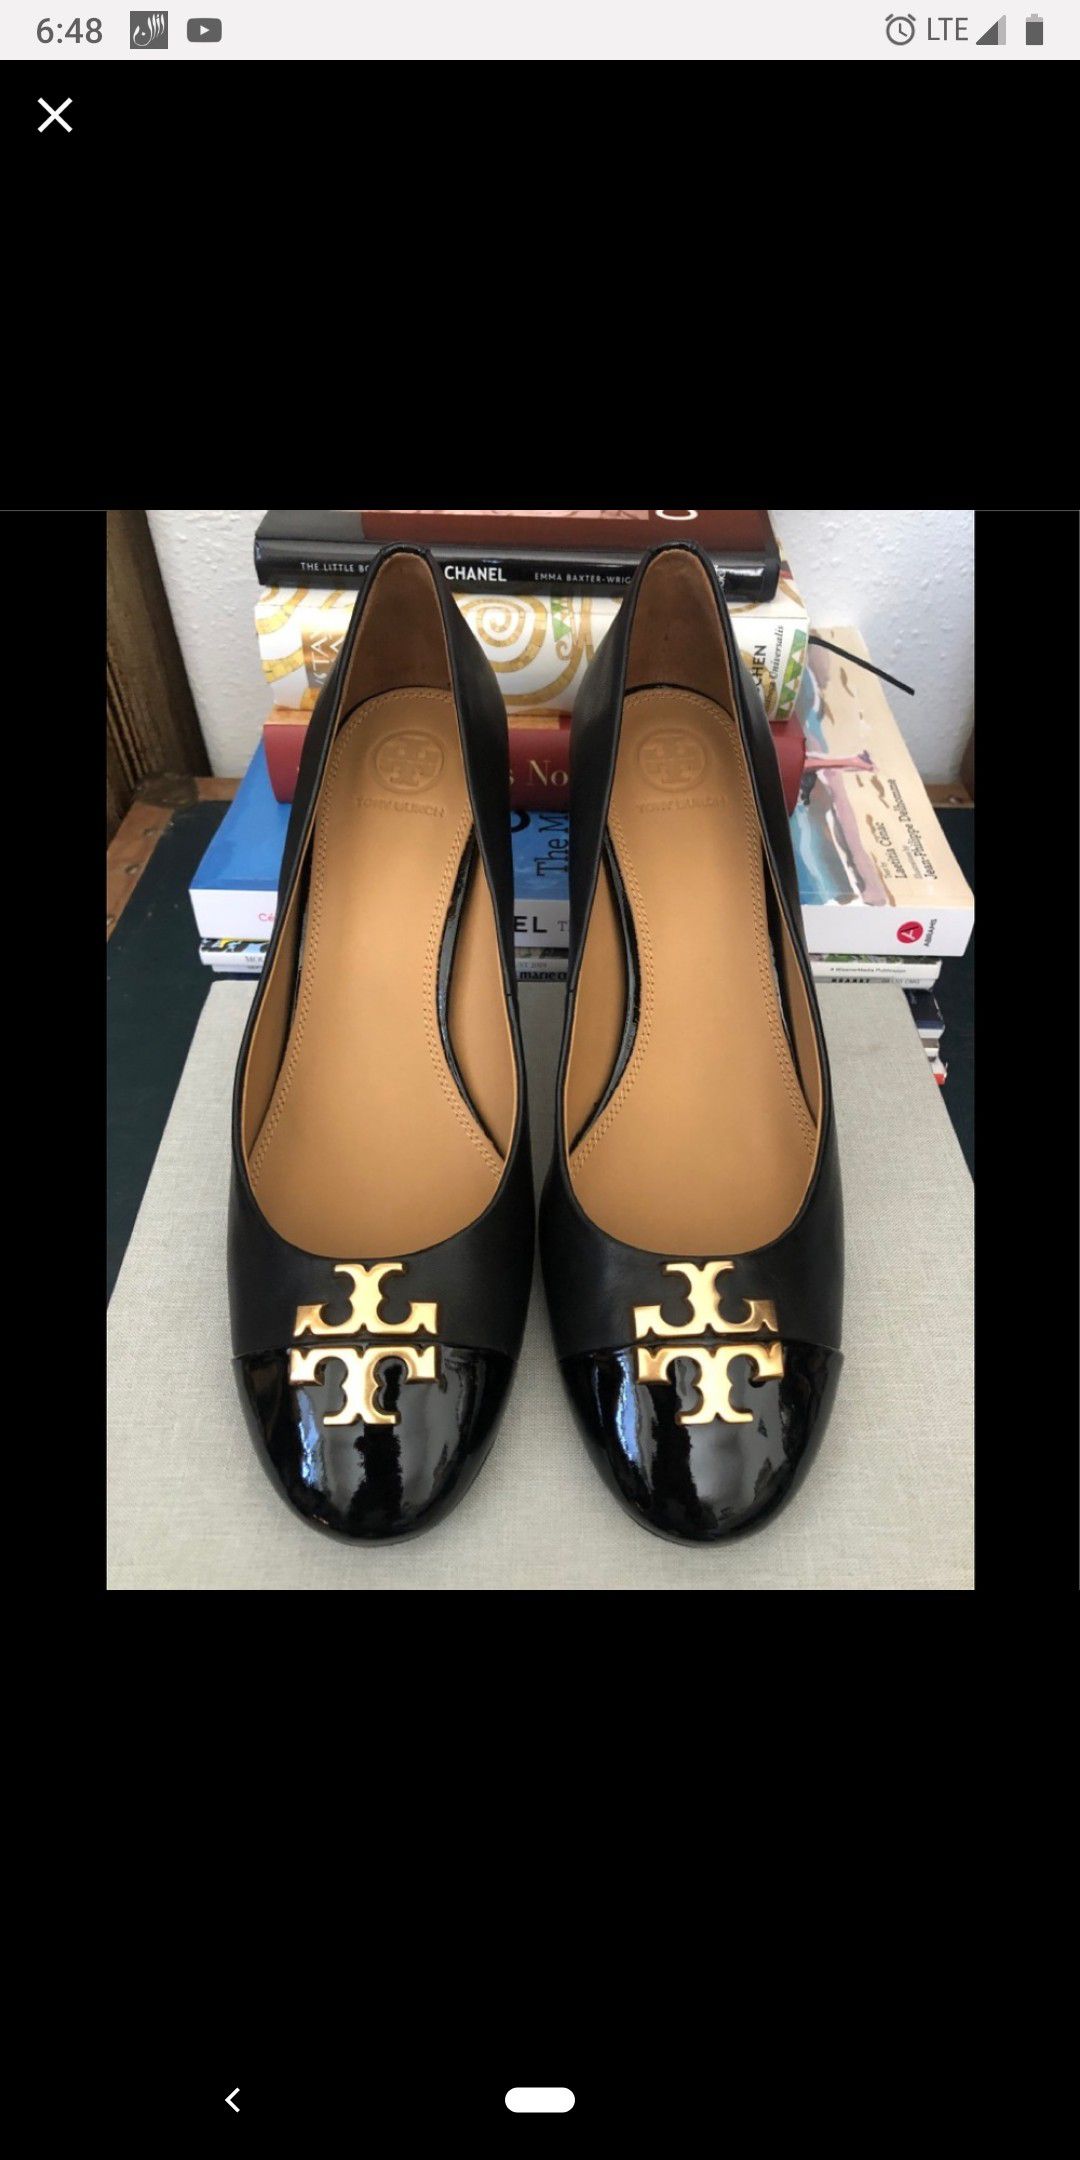 New black shoes by Tory Burch size 8.5 come with the original dust bag